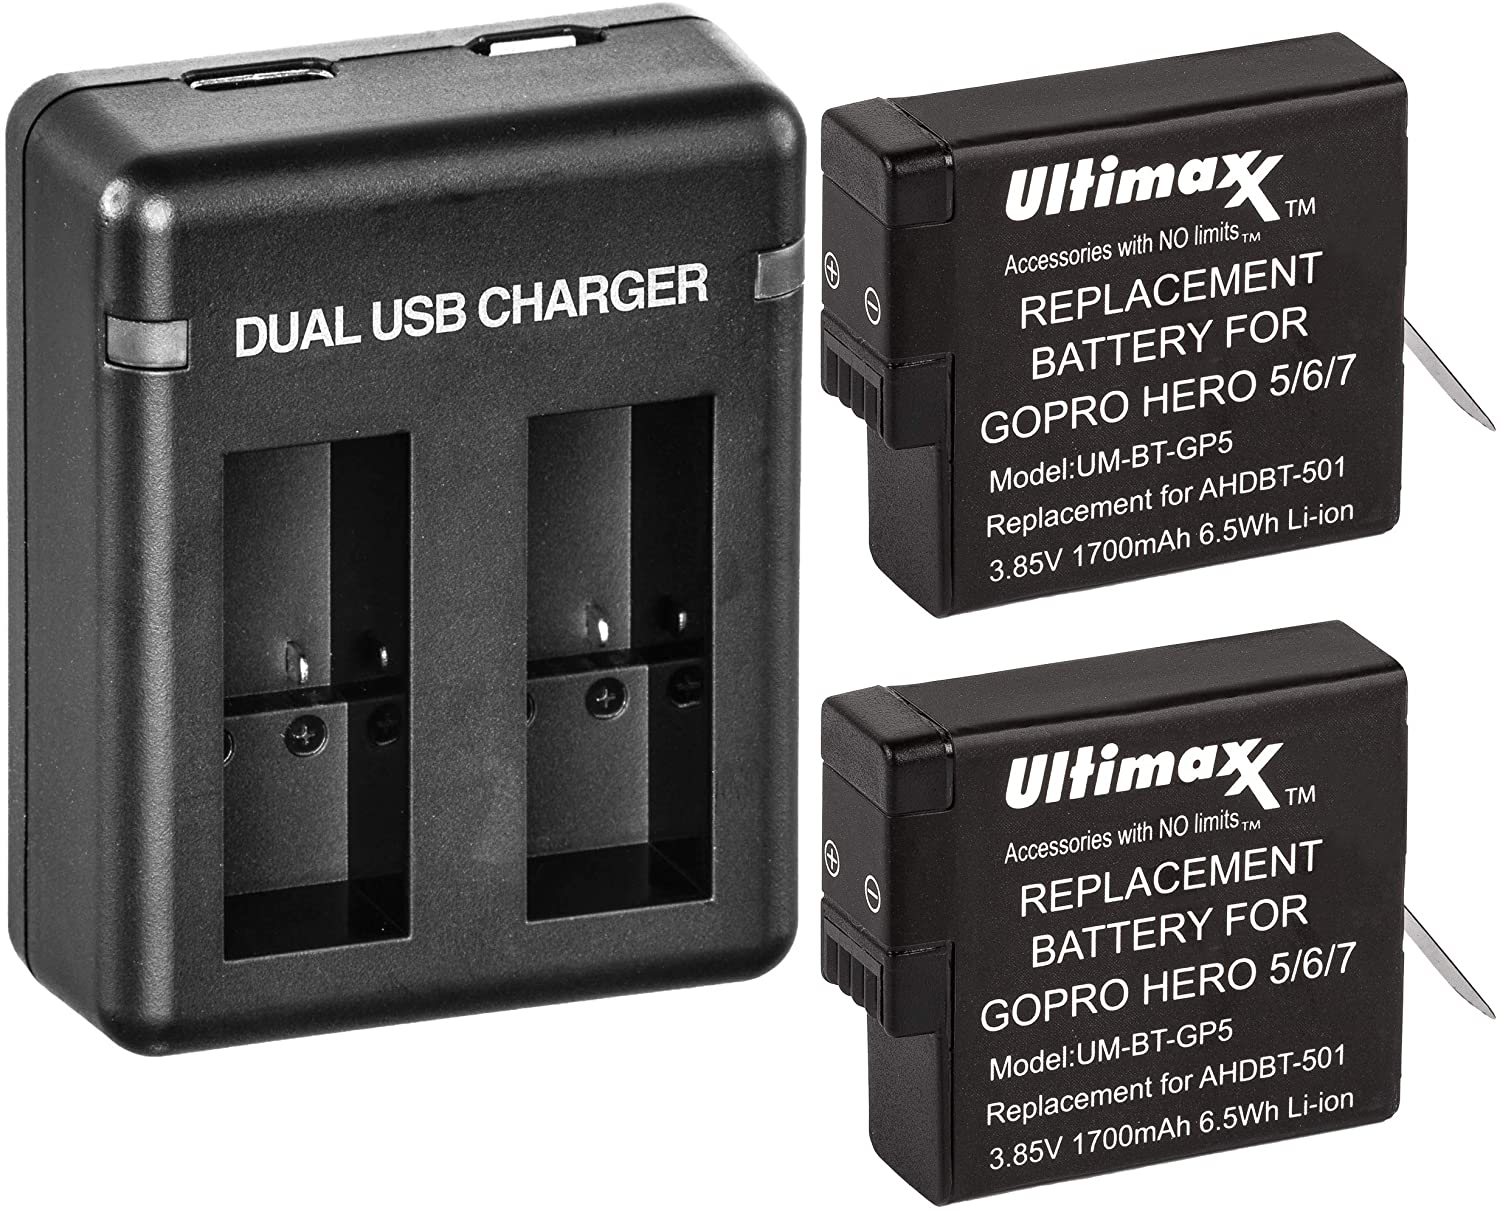 Ultimaxx Dual USB Battery Charger for GoPro Hero 5, 6, 7, 8 Batteries with 2X Extended Life Replacement Batteries (1700mAh / 3.85V / 6.5Wh) for Use with GoPro HERO5, HERO6, HERO7 & HERO8 Action Cams - image 5 of 7